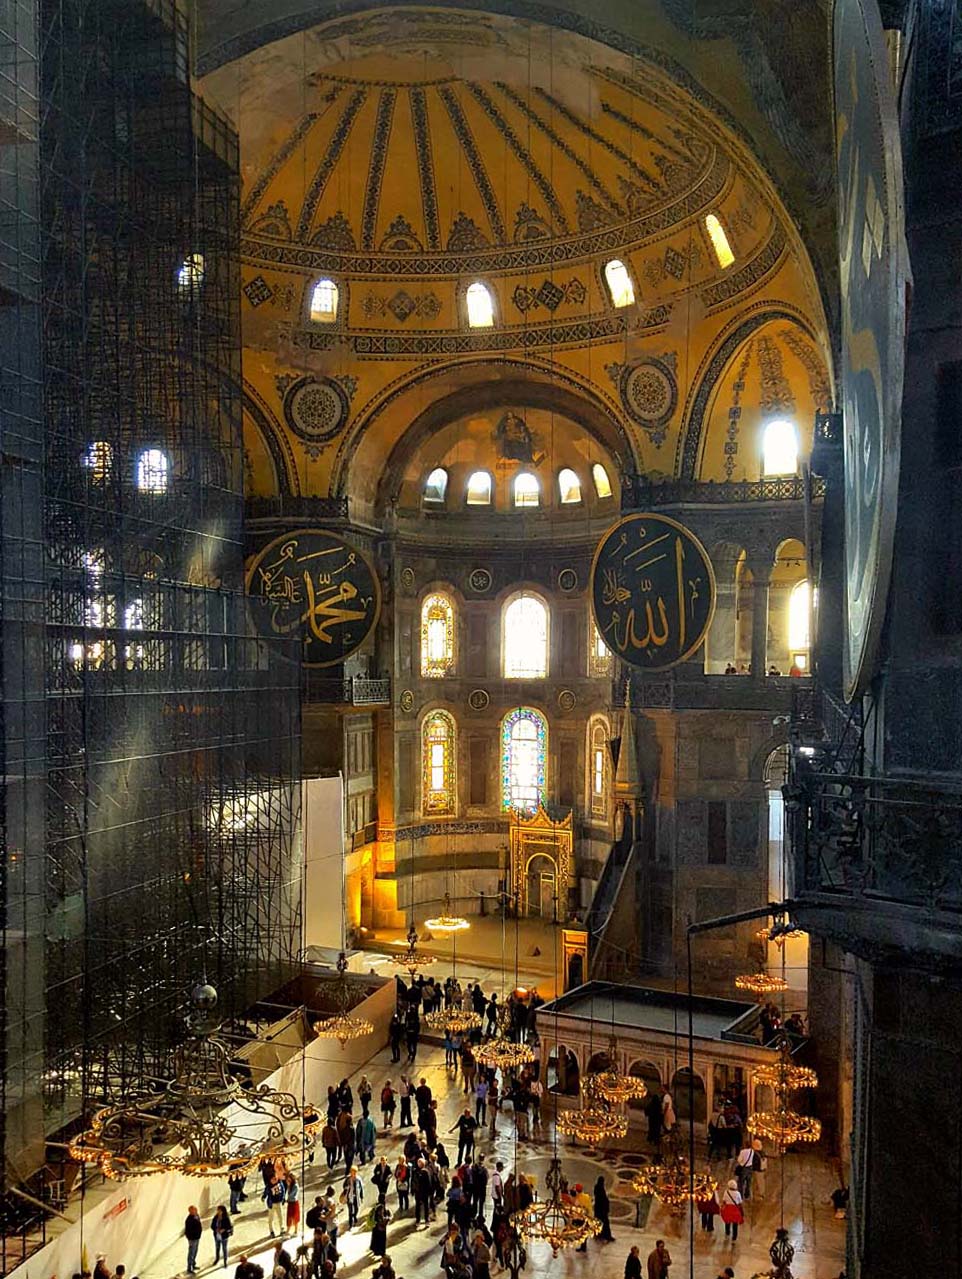 Interior of the Hagia Sophia, glowing gold in the light